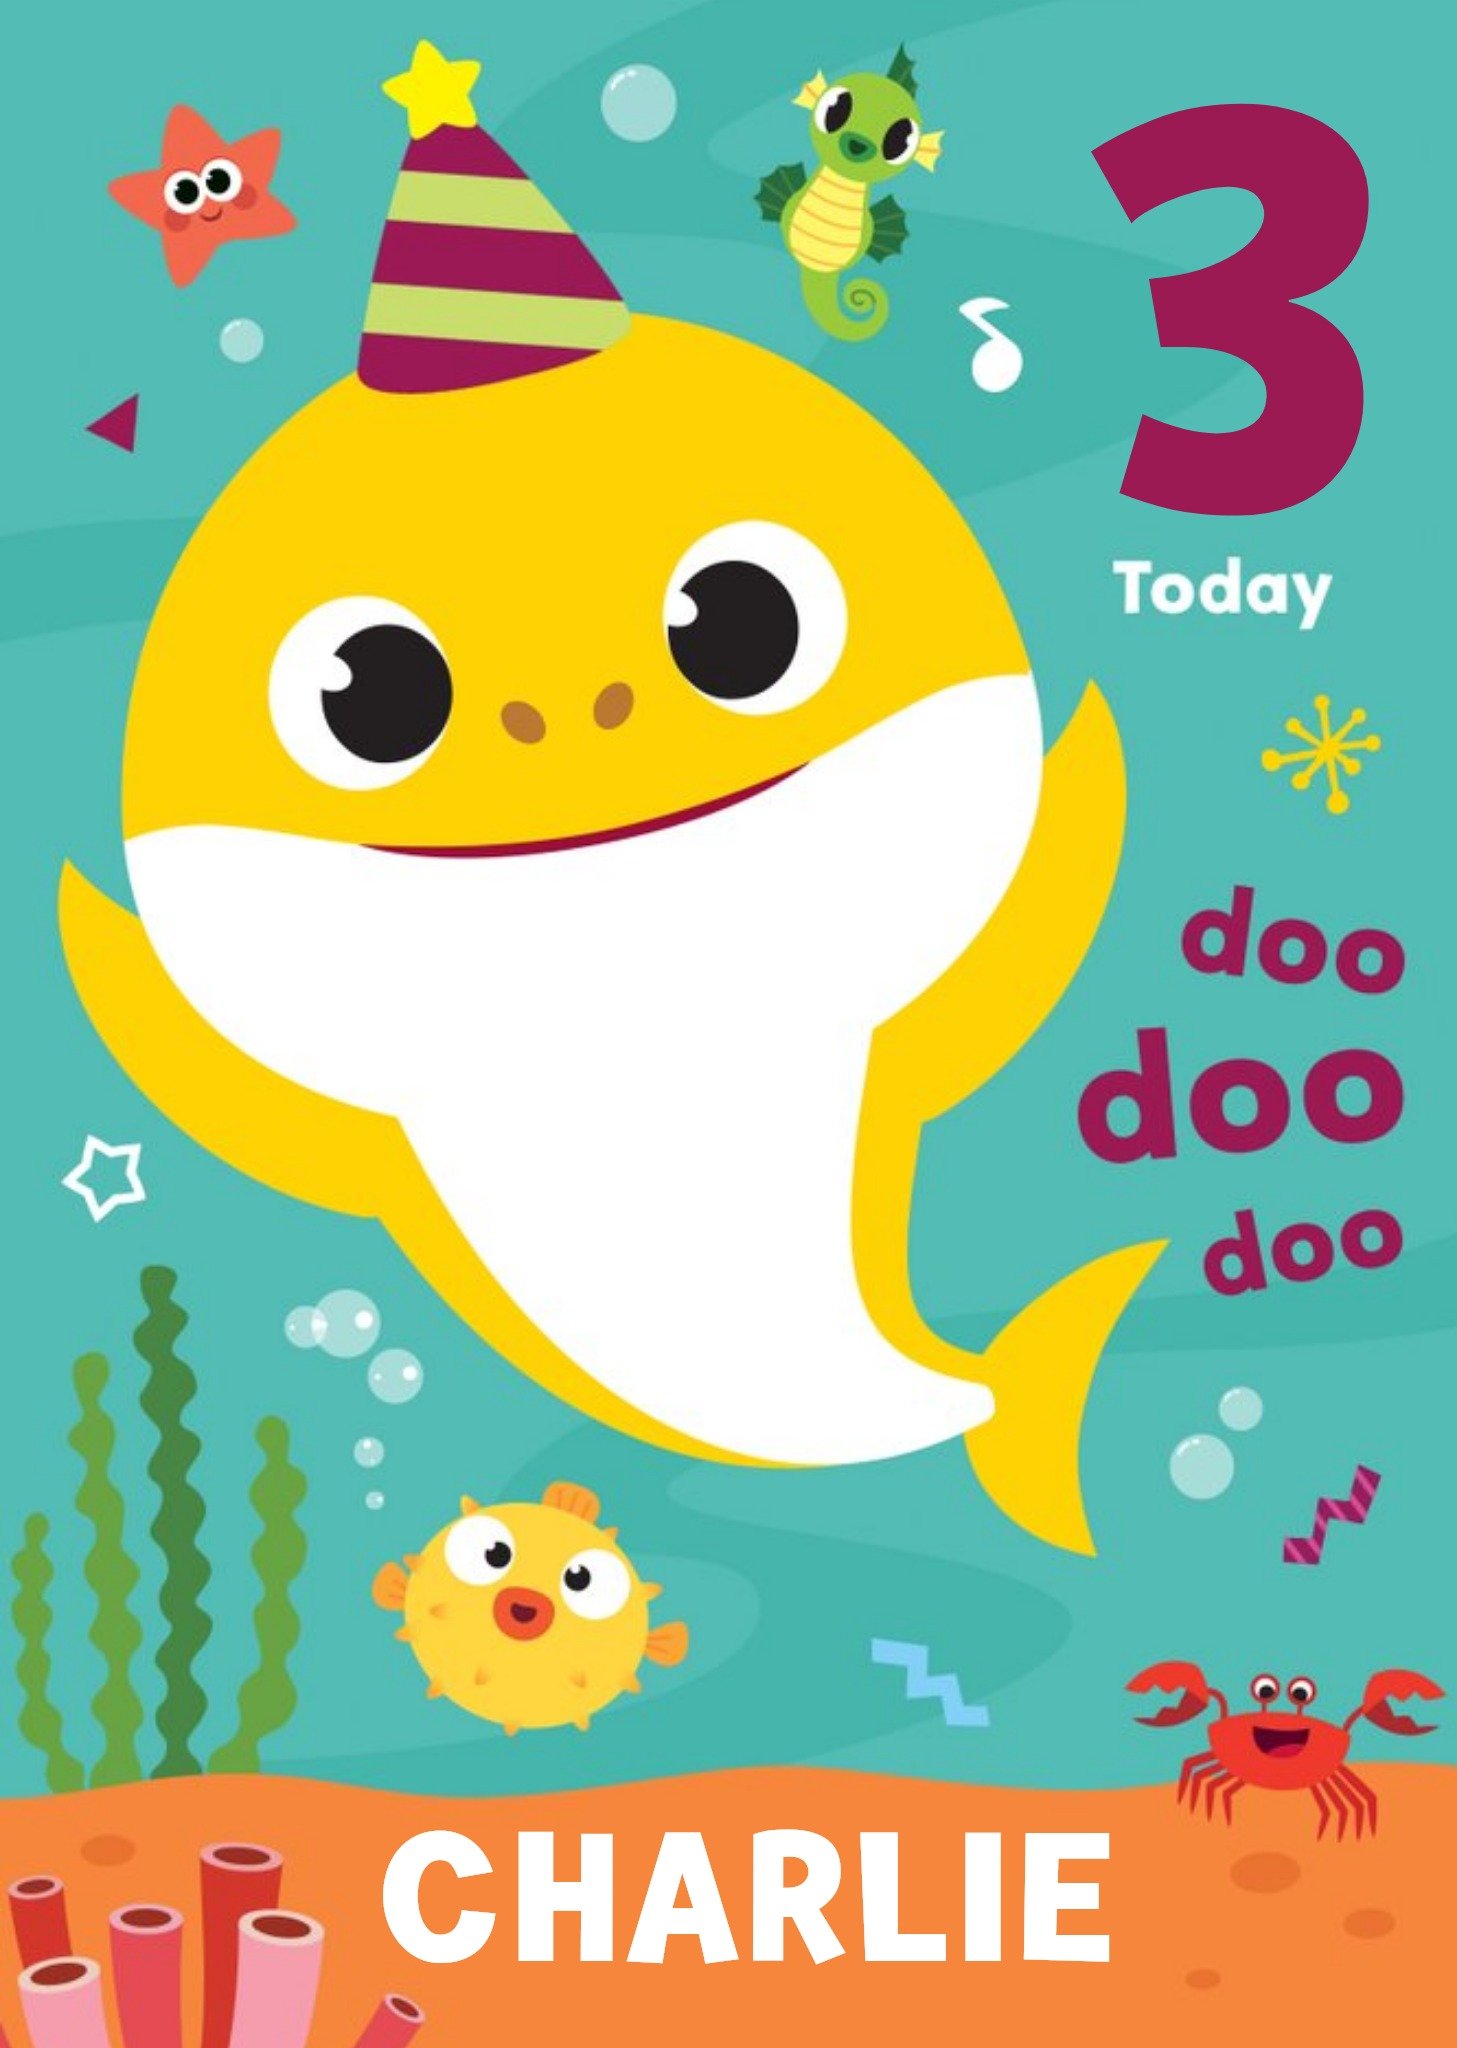 Baby Shark Song Kids 3 Today Birthday Card, Large